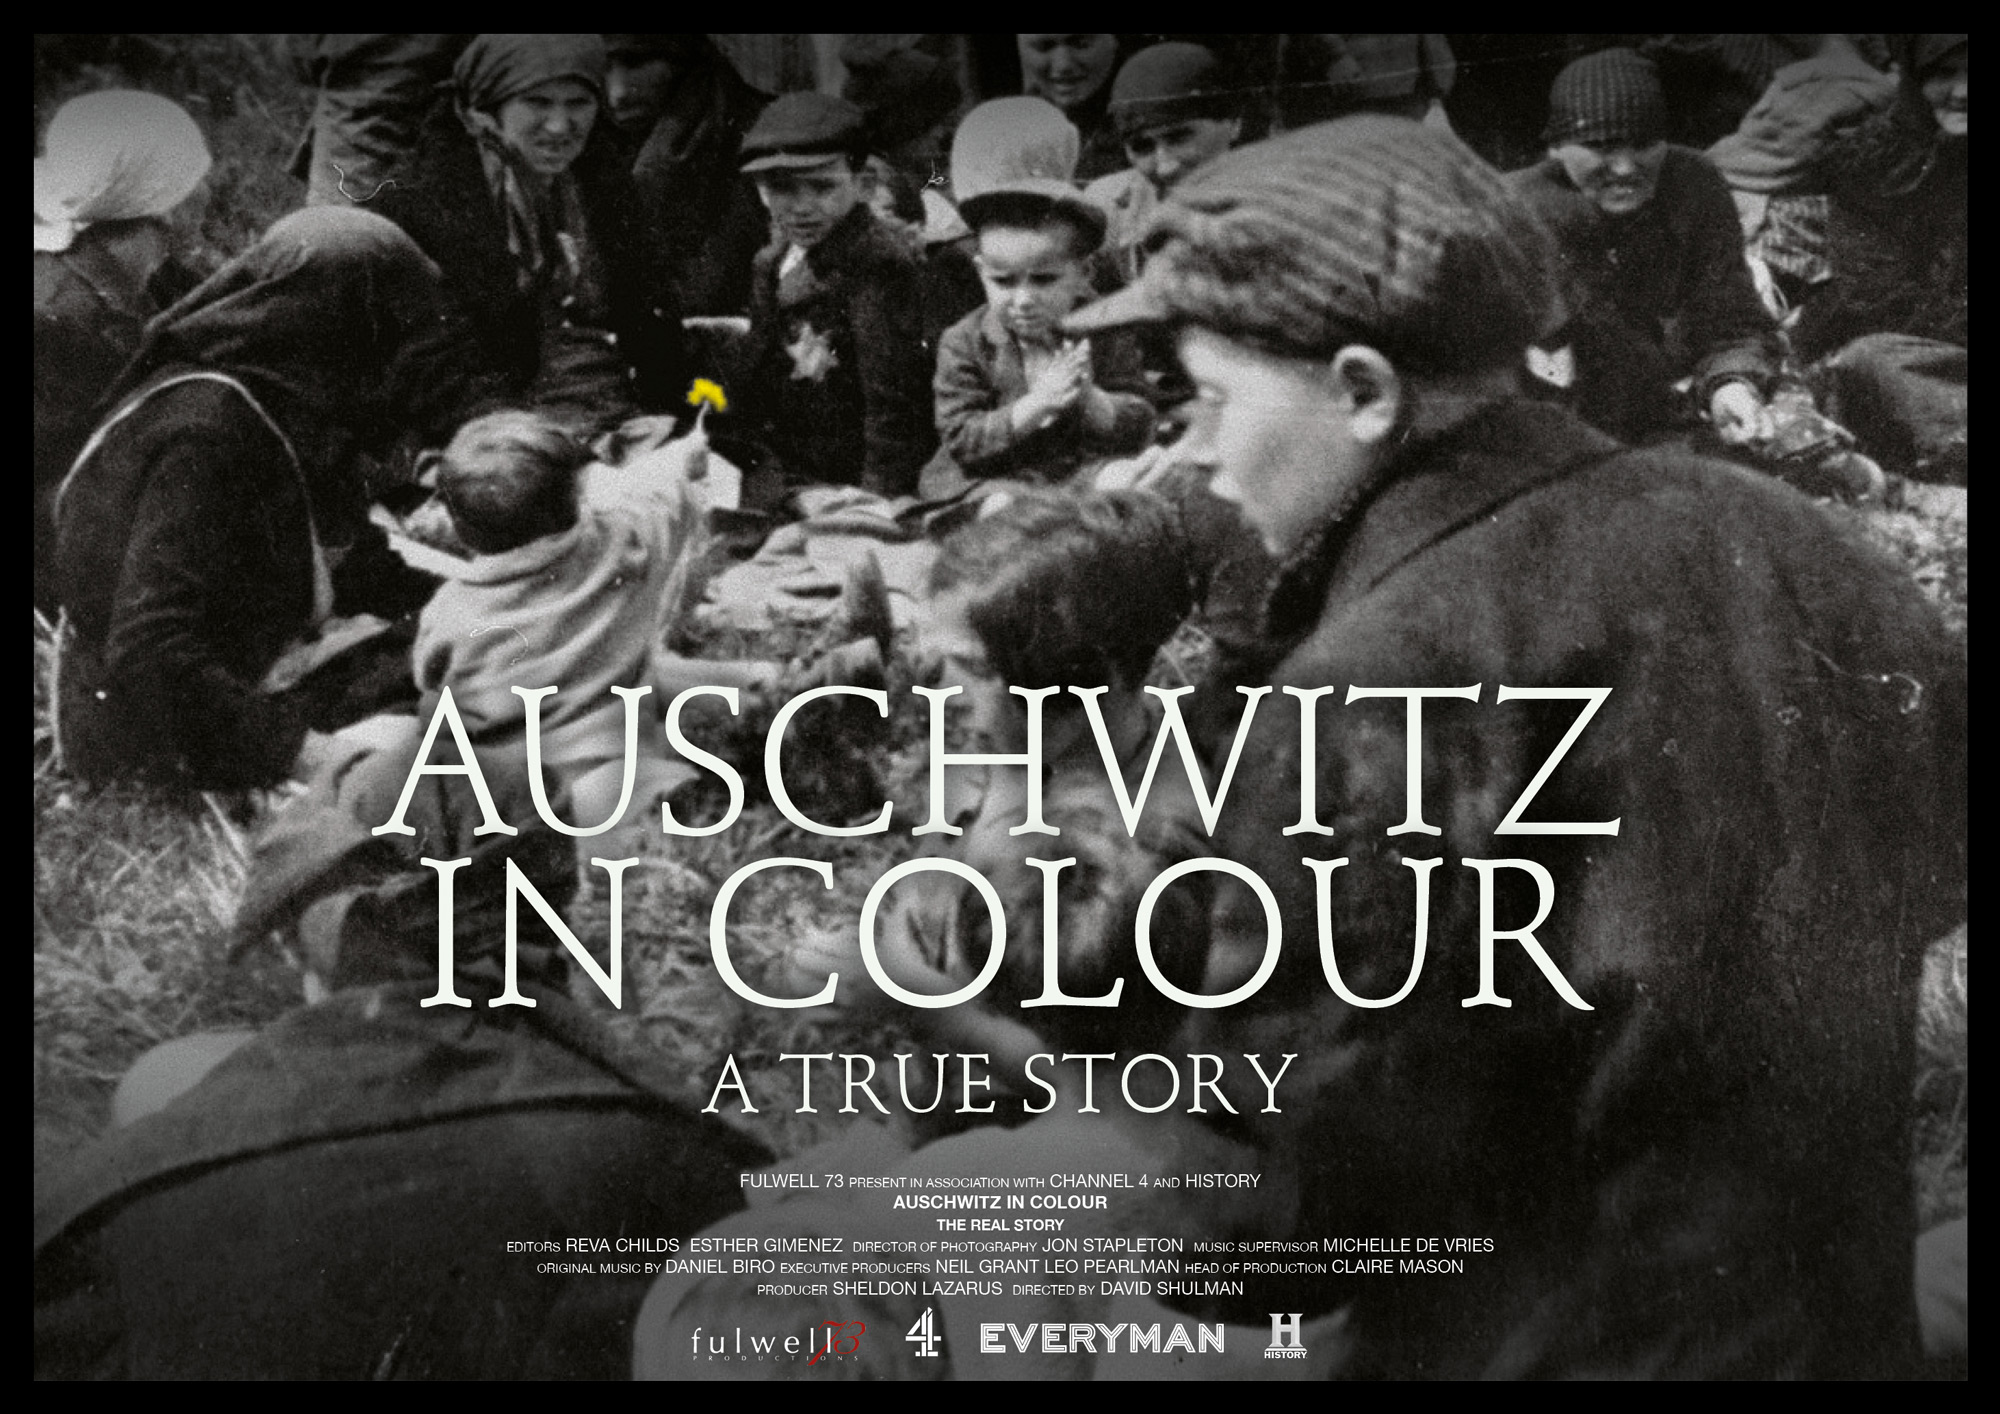 Promo image for Auschwitz Untold in Color